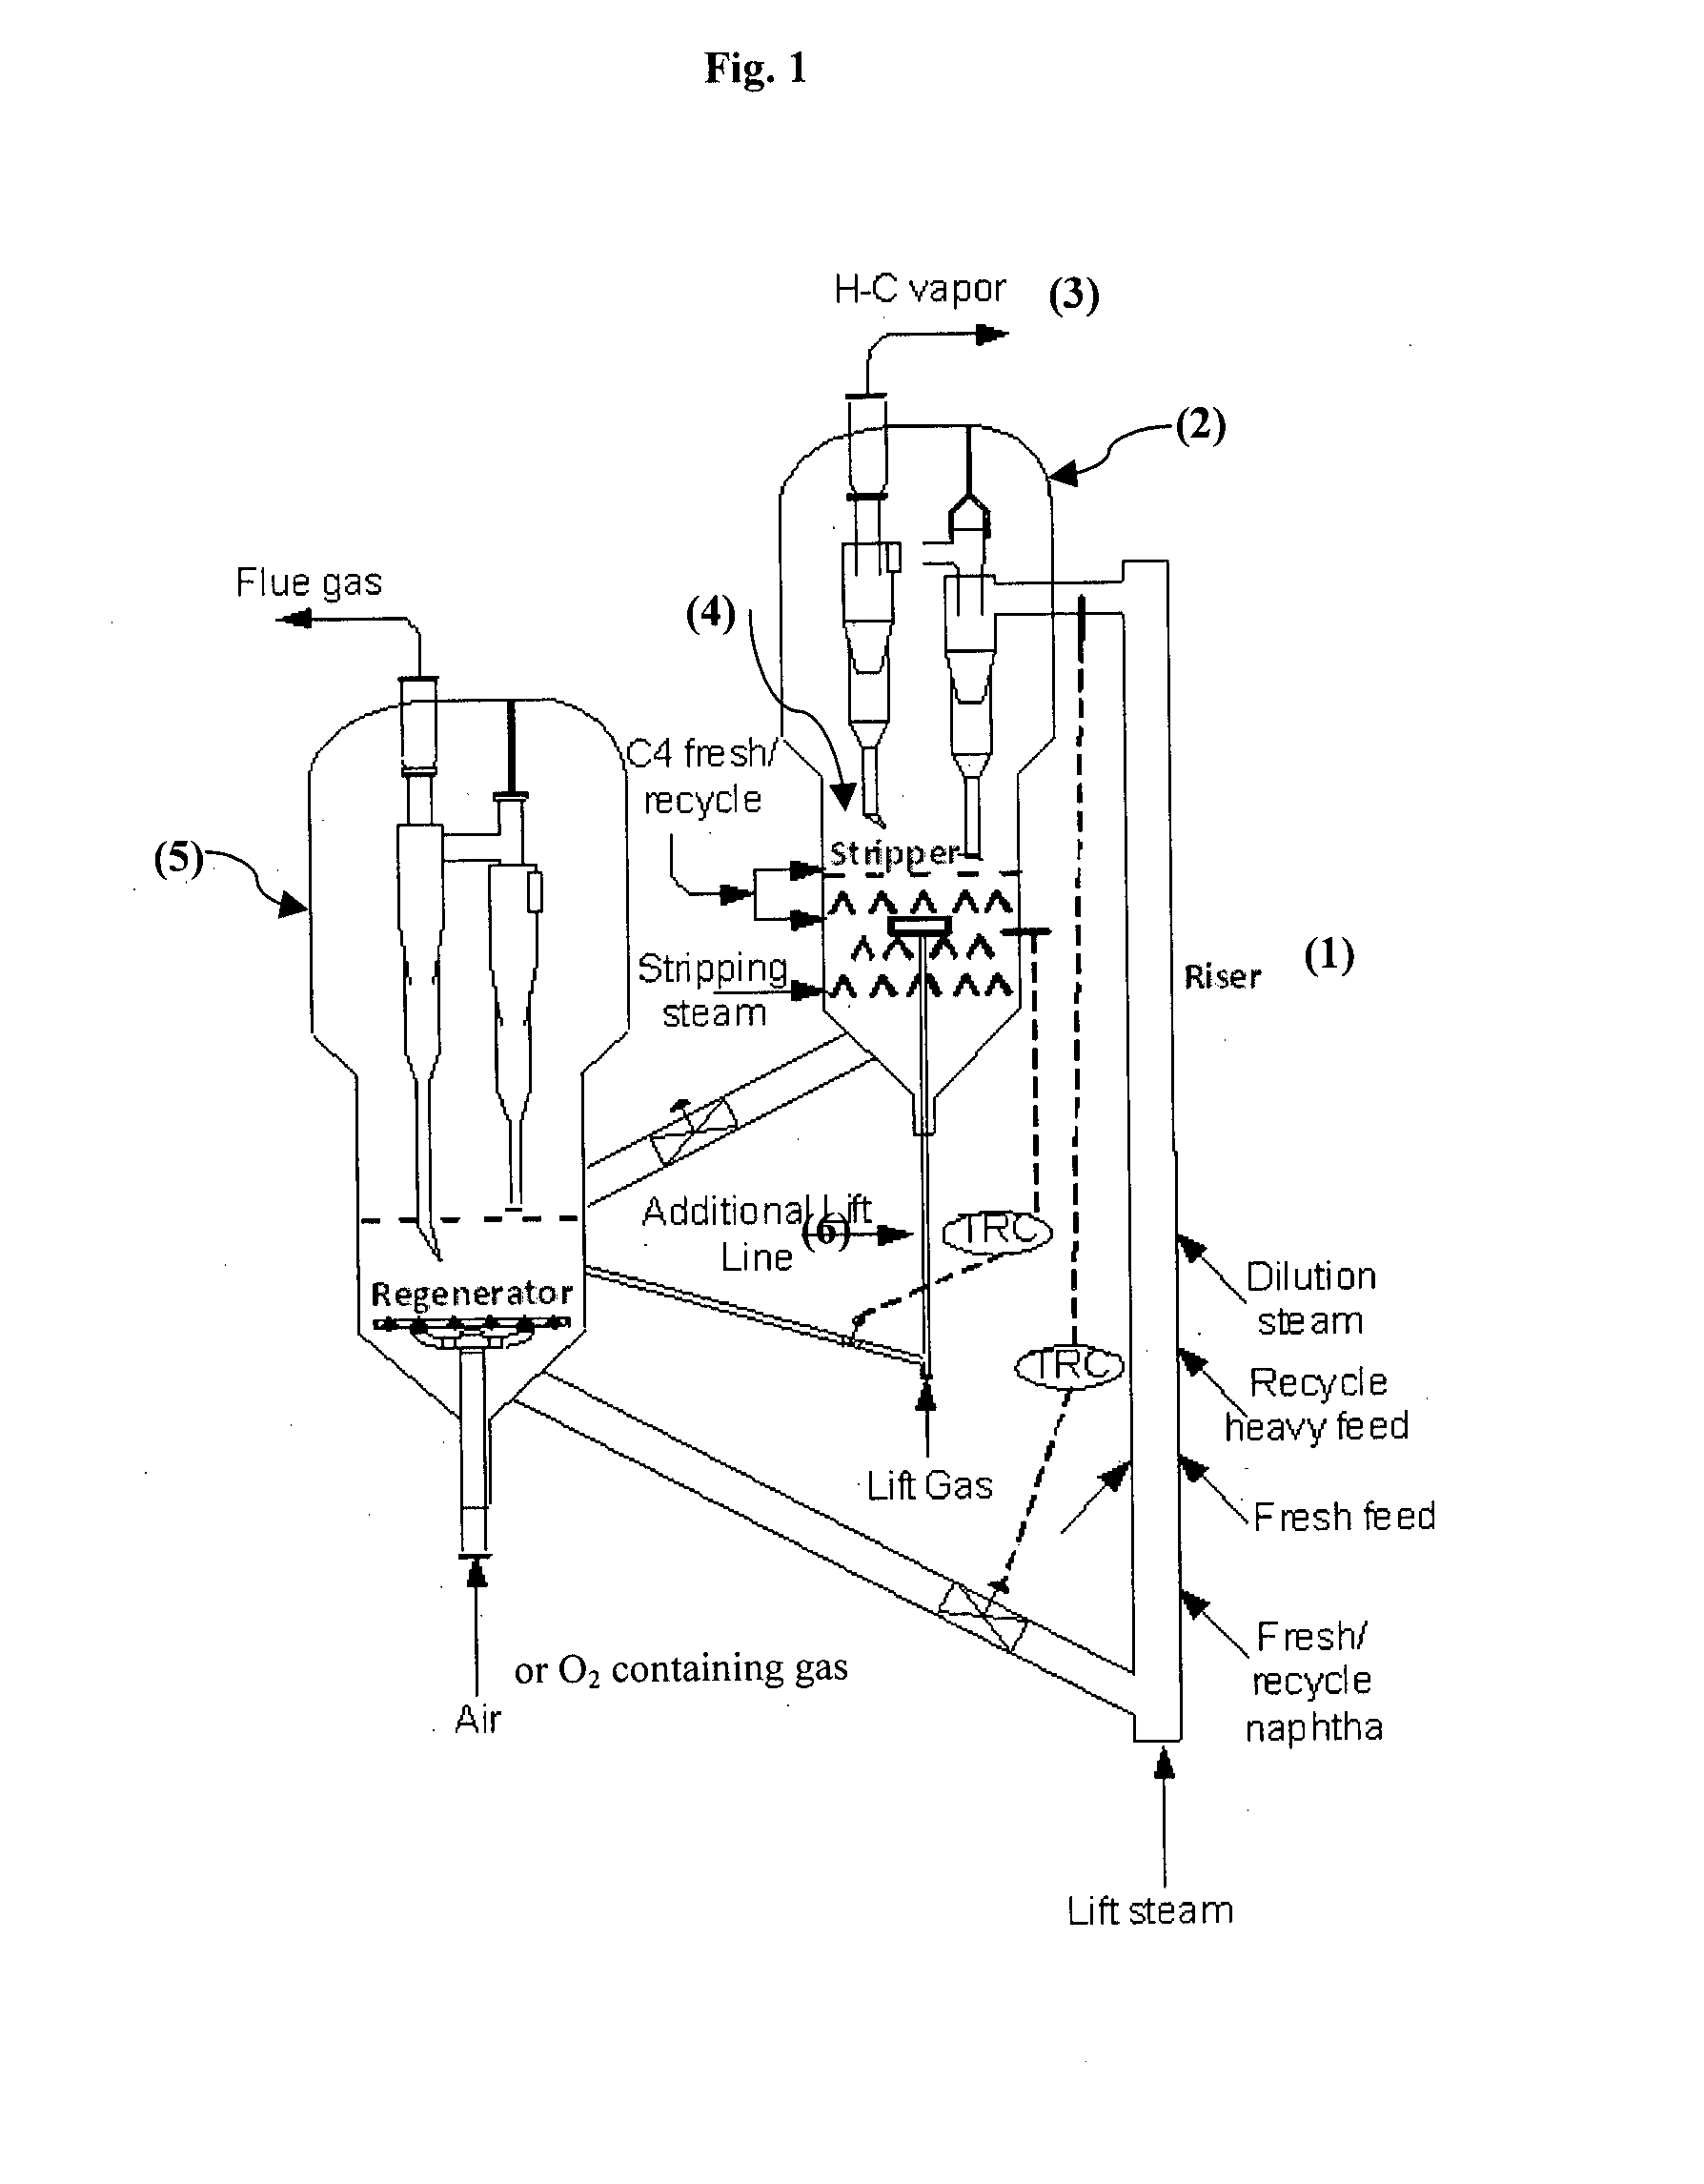 PROCESS FOR PRODUCTION OF C<sub>3</sub> OLEFIN IN A FLUID CATALYTIC CRACKING UNIT